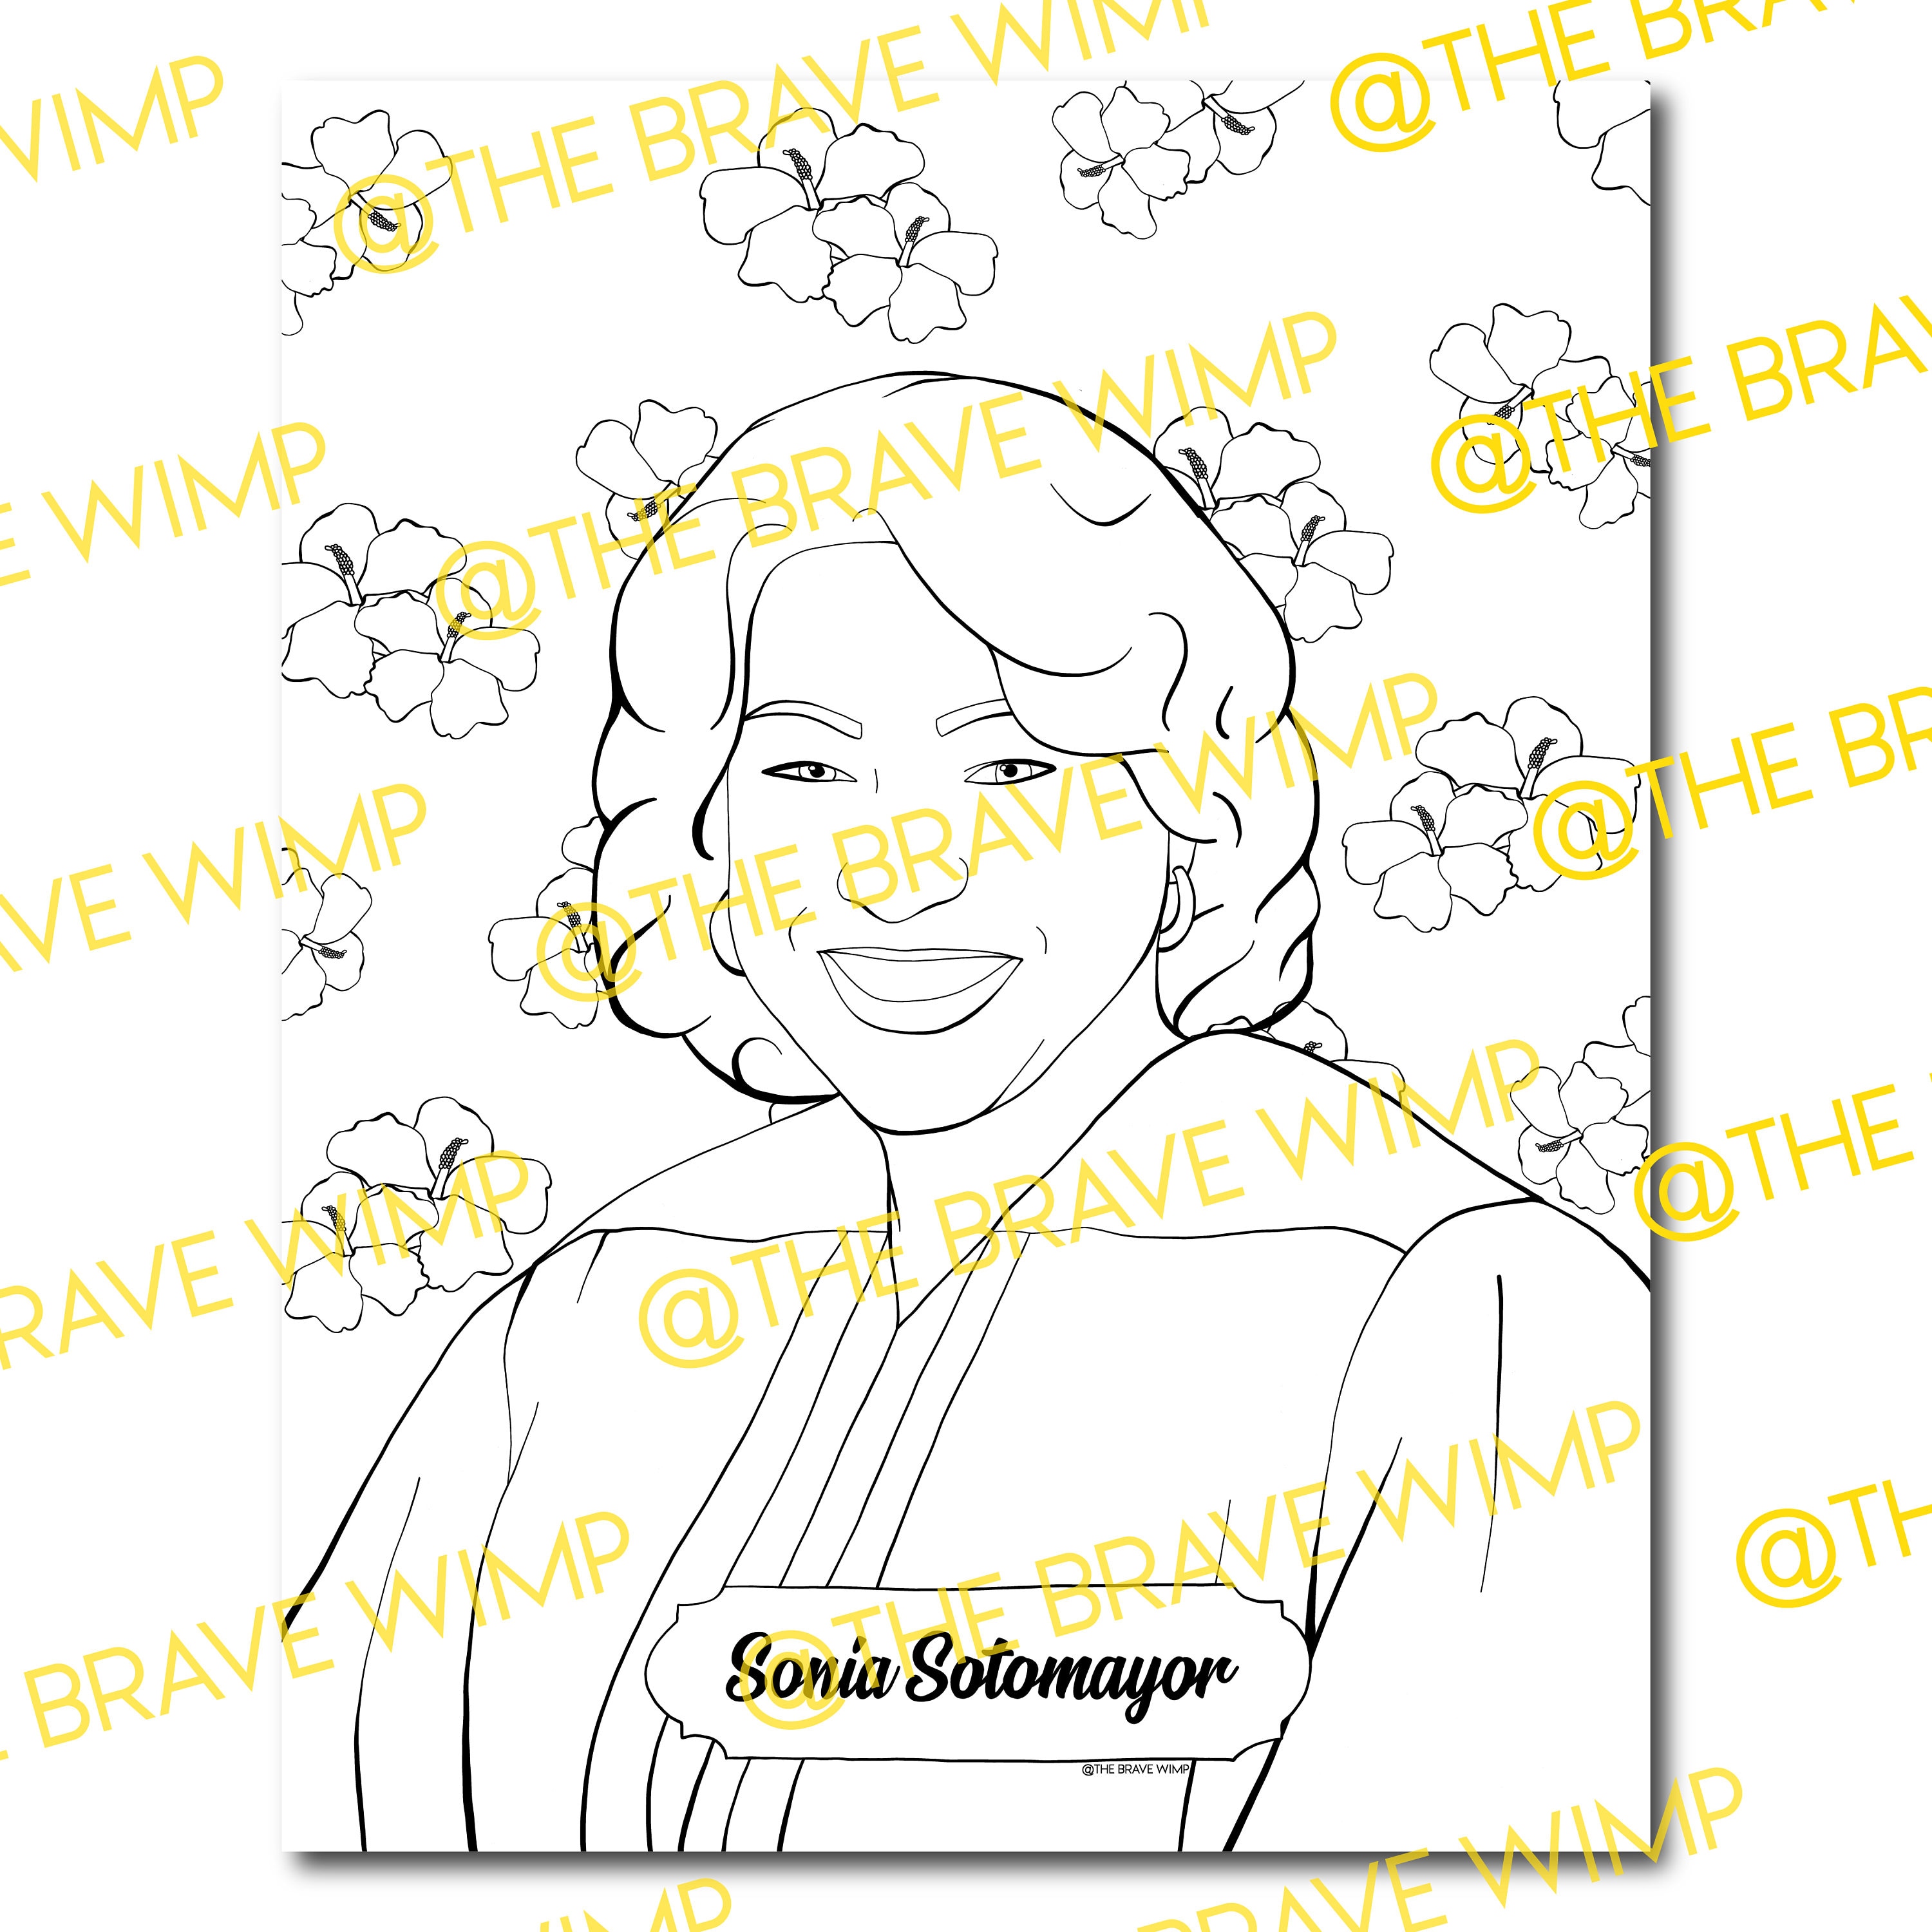 Sonia sotomayor coloring page sheroes our time is now digital download